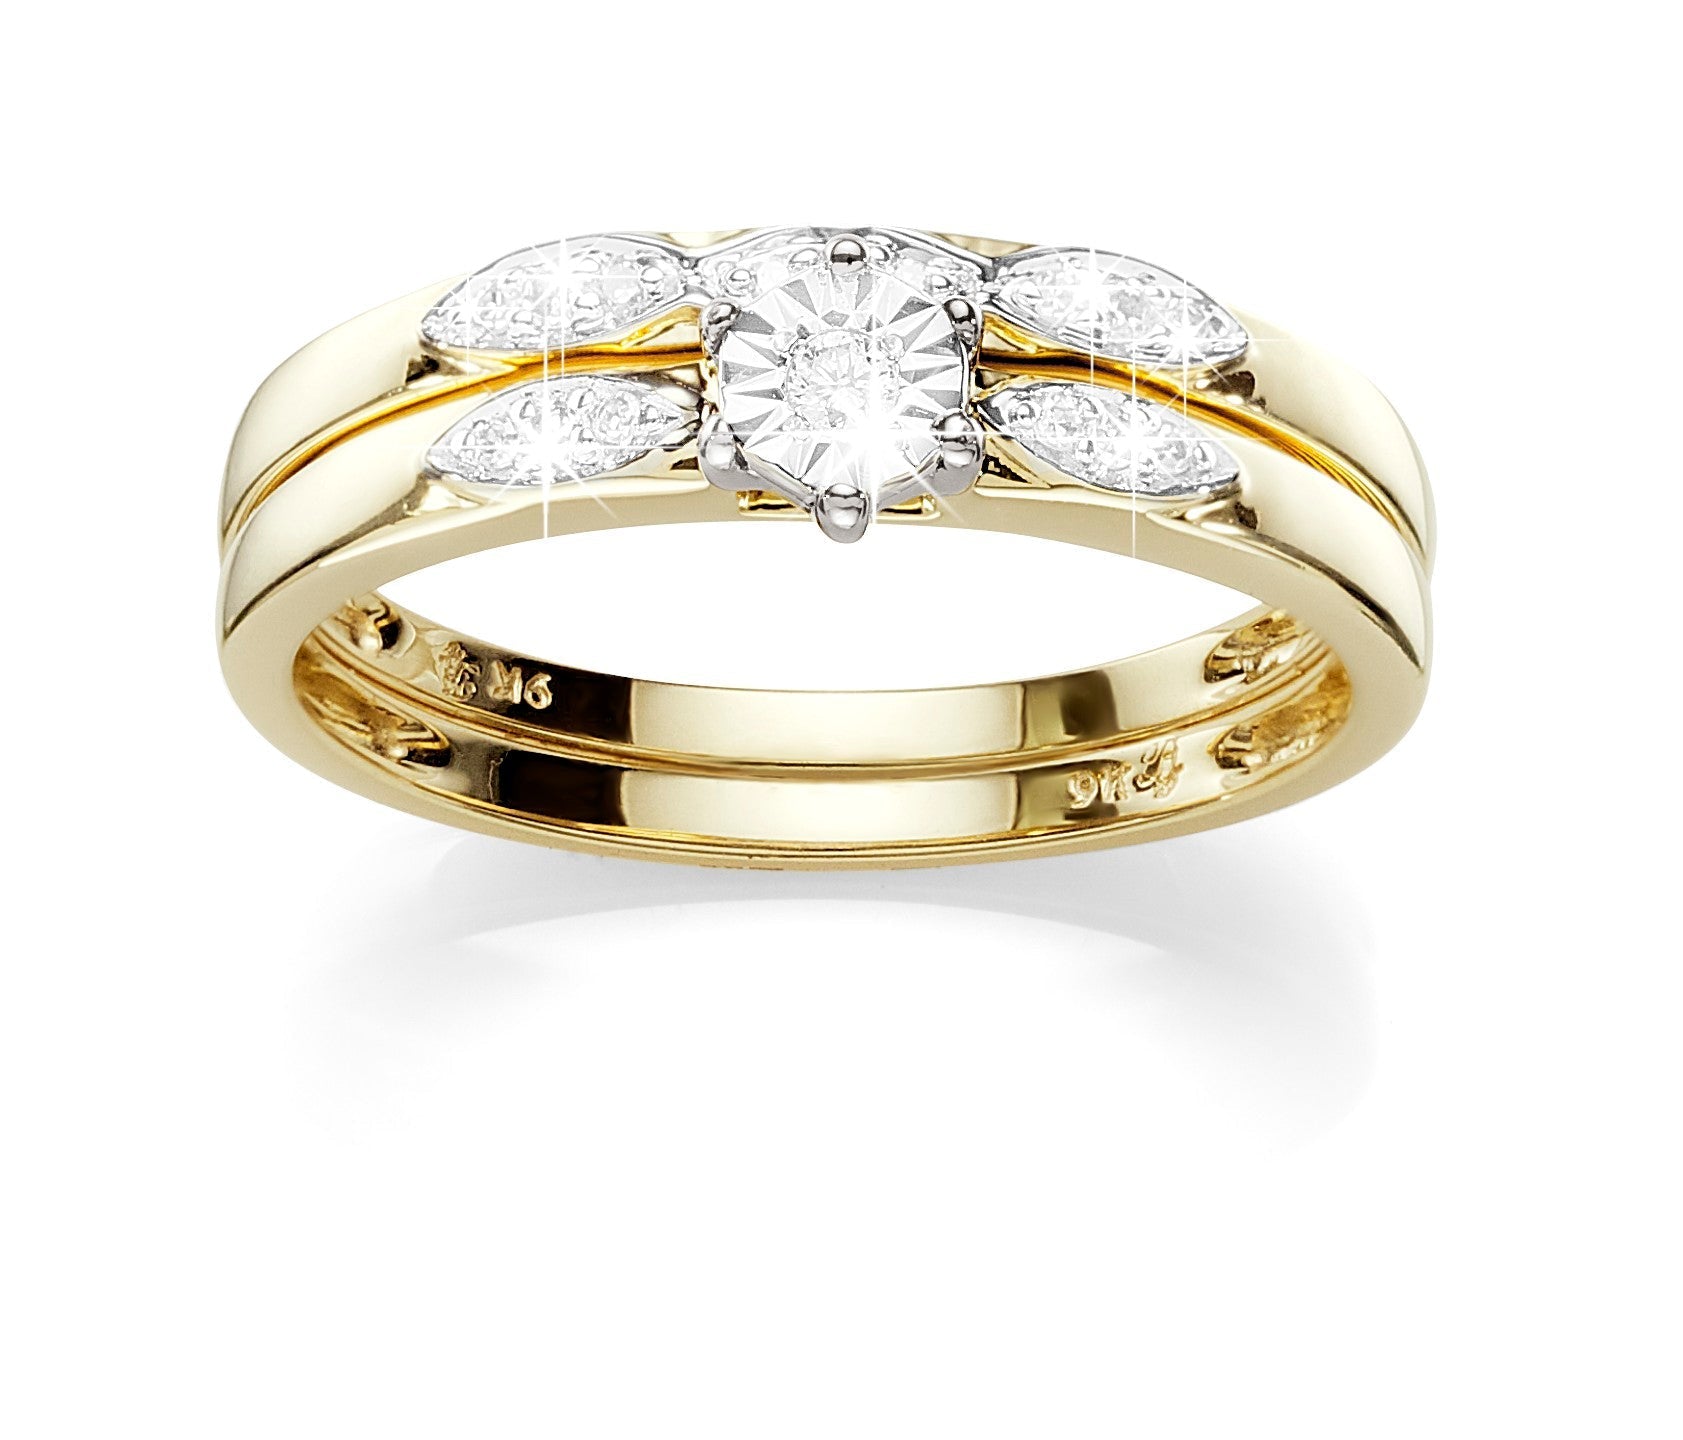 9ct gold diamond ring with matching band